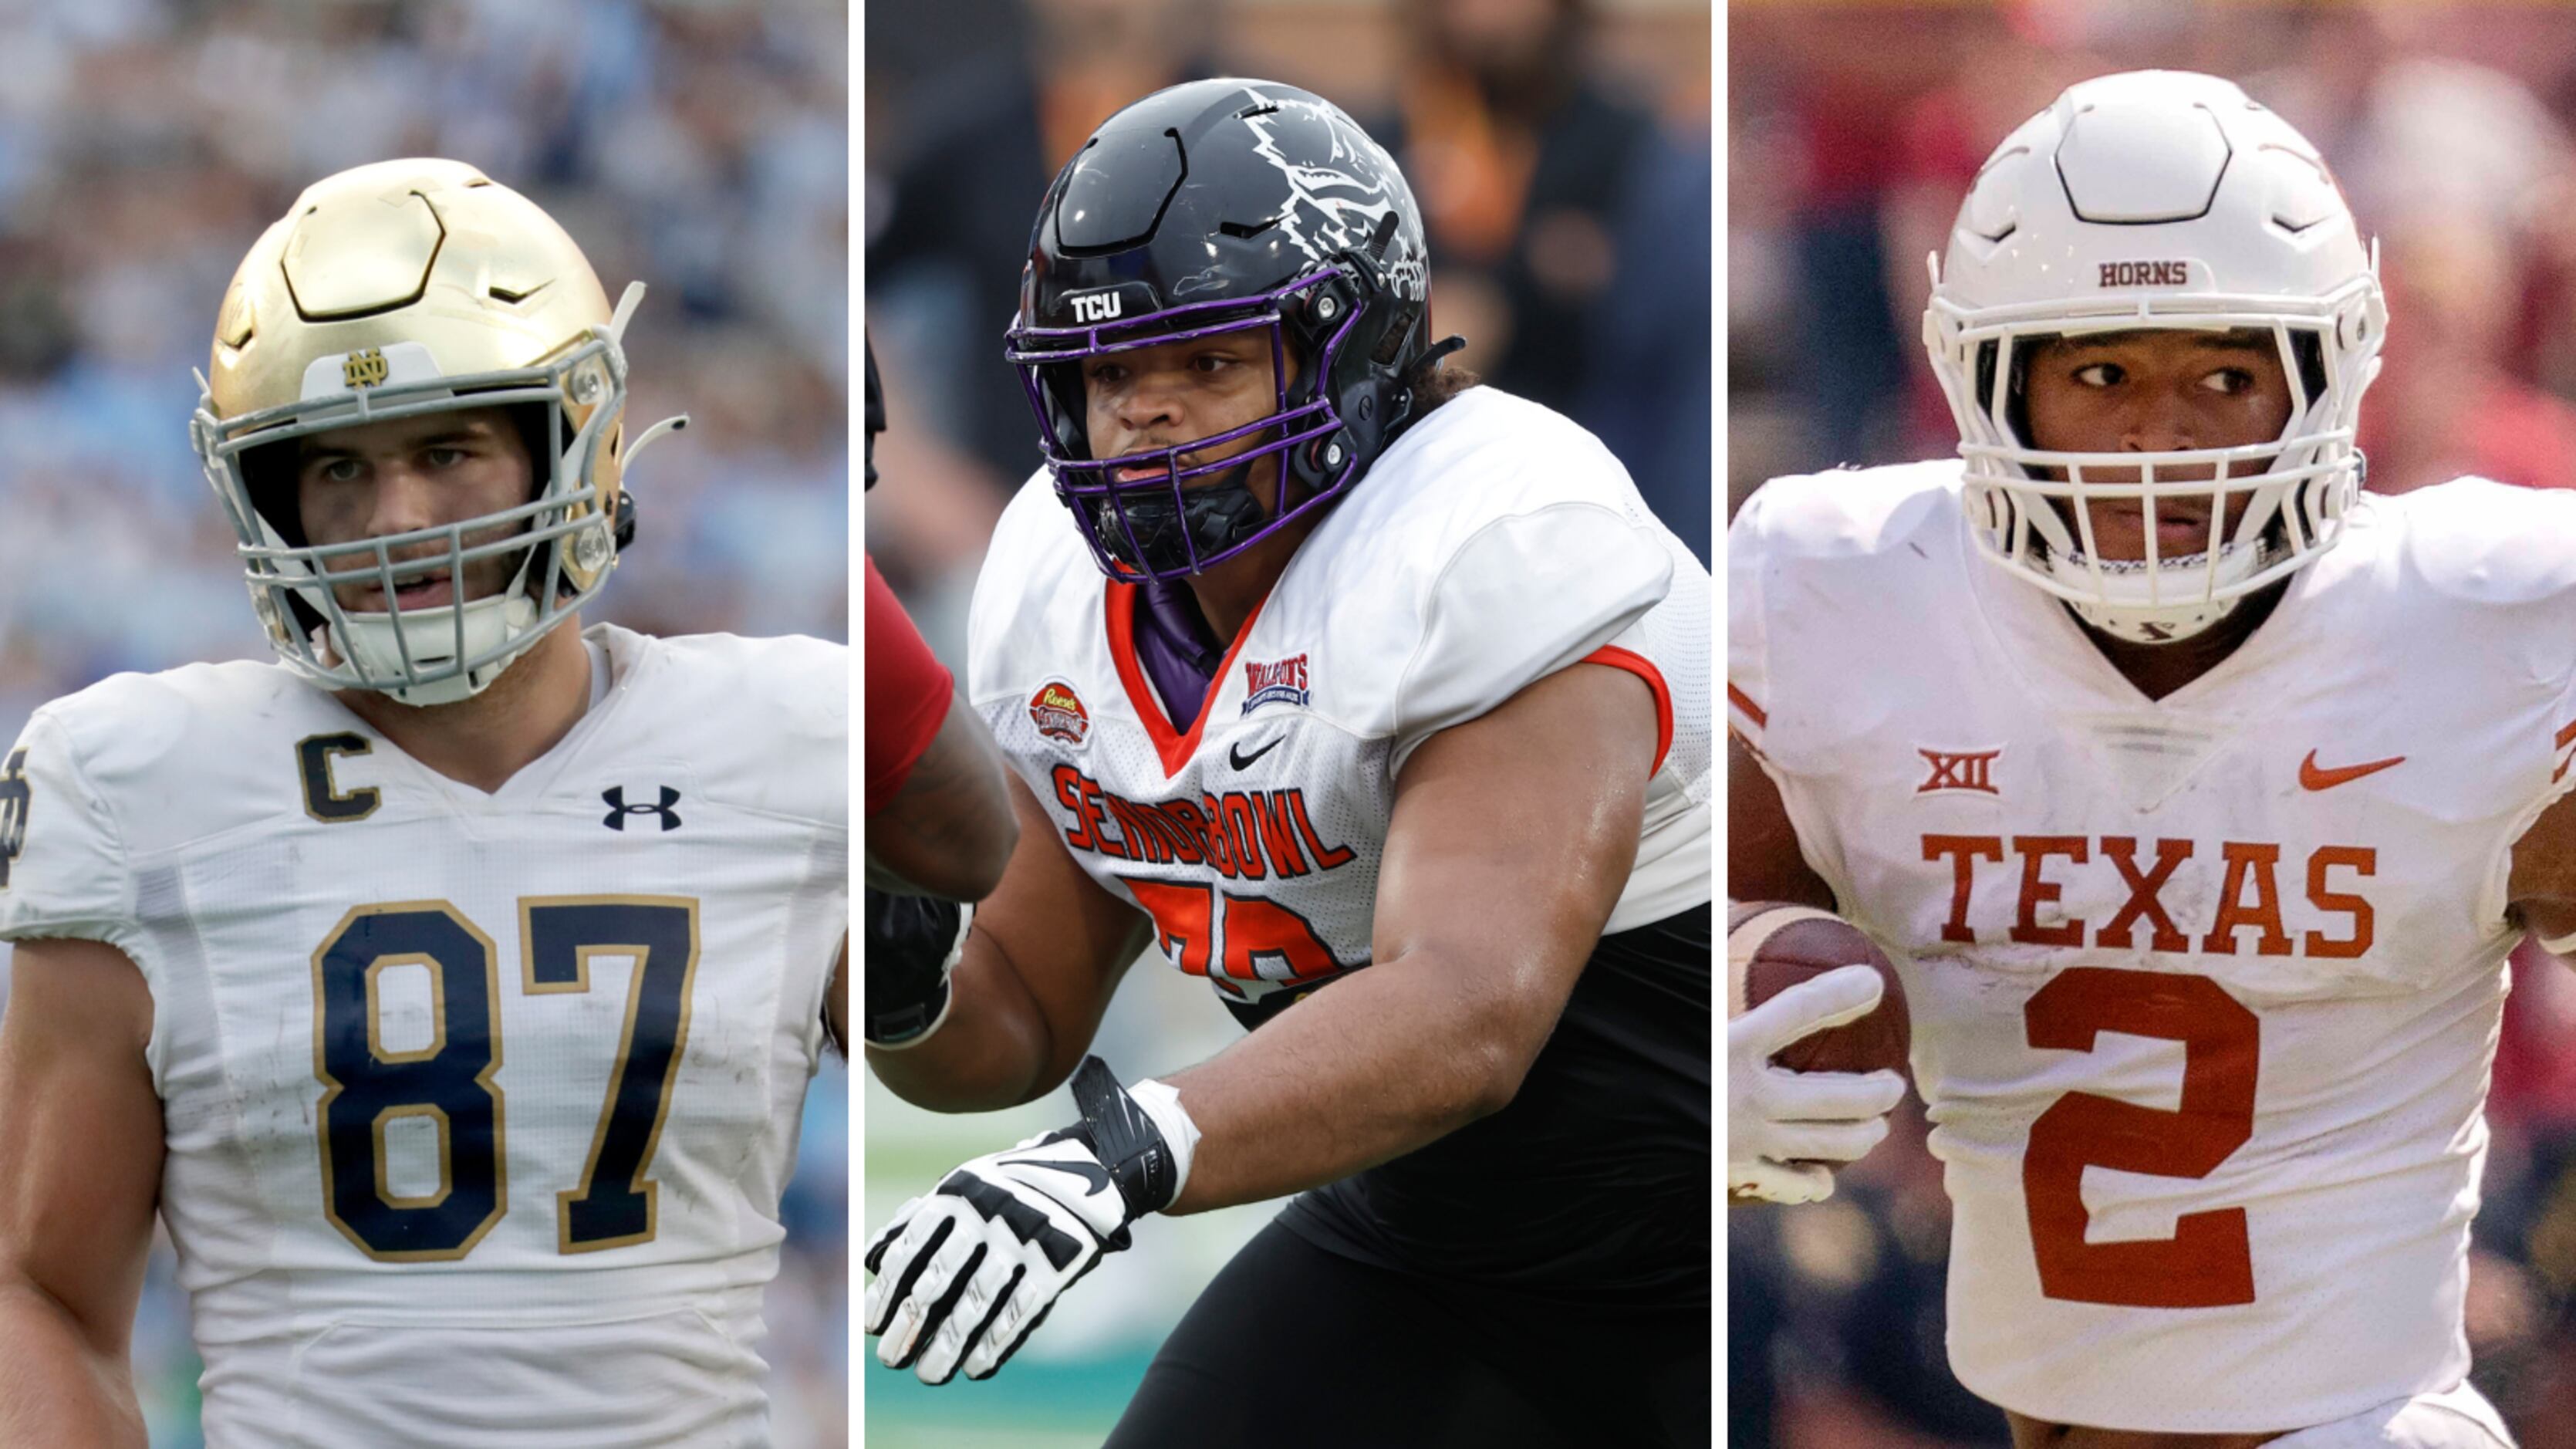 2022 NFL draft: Best available players for Bears on Day 2